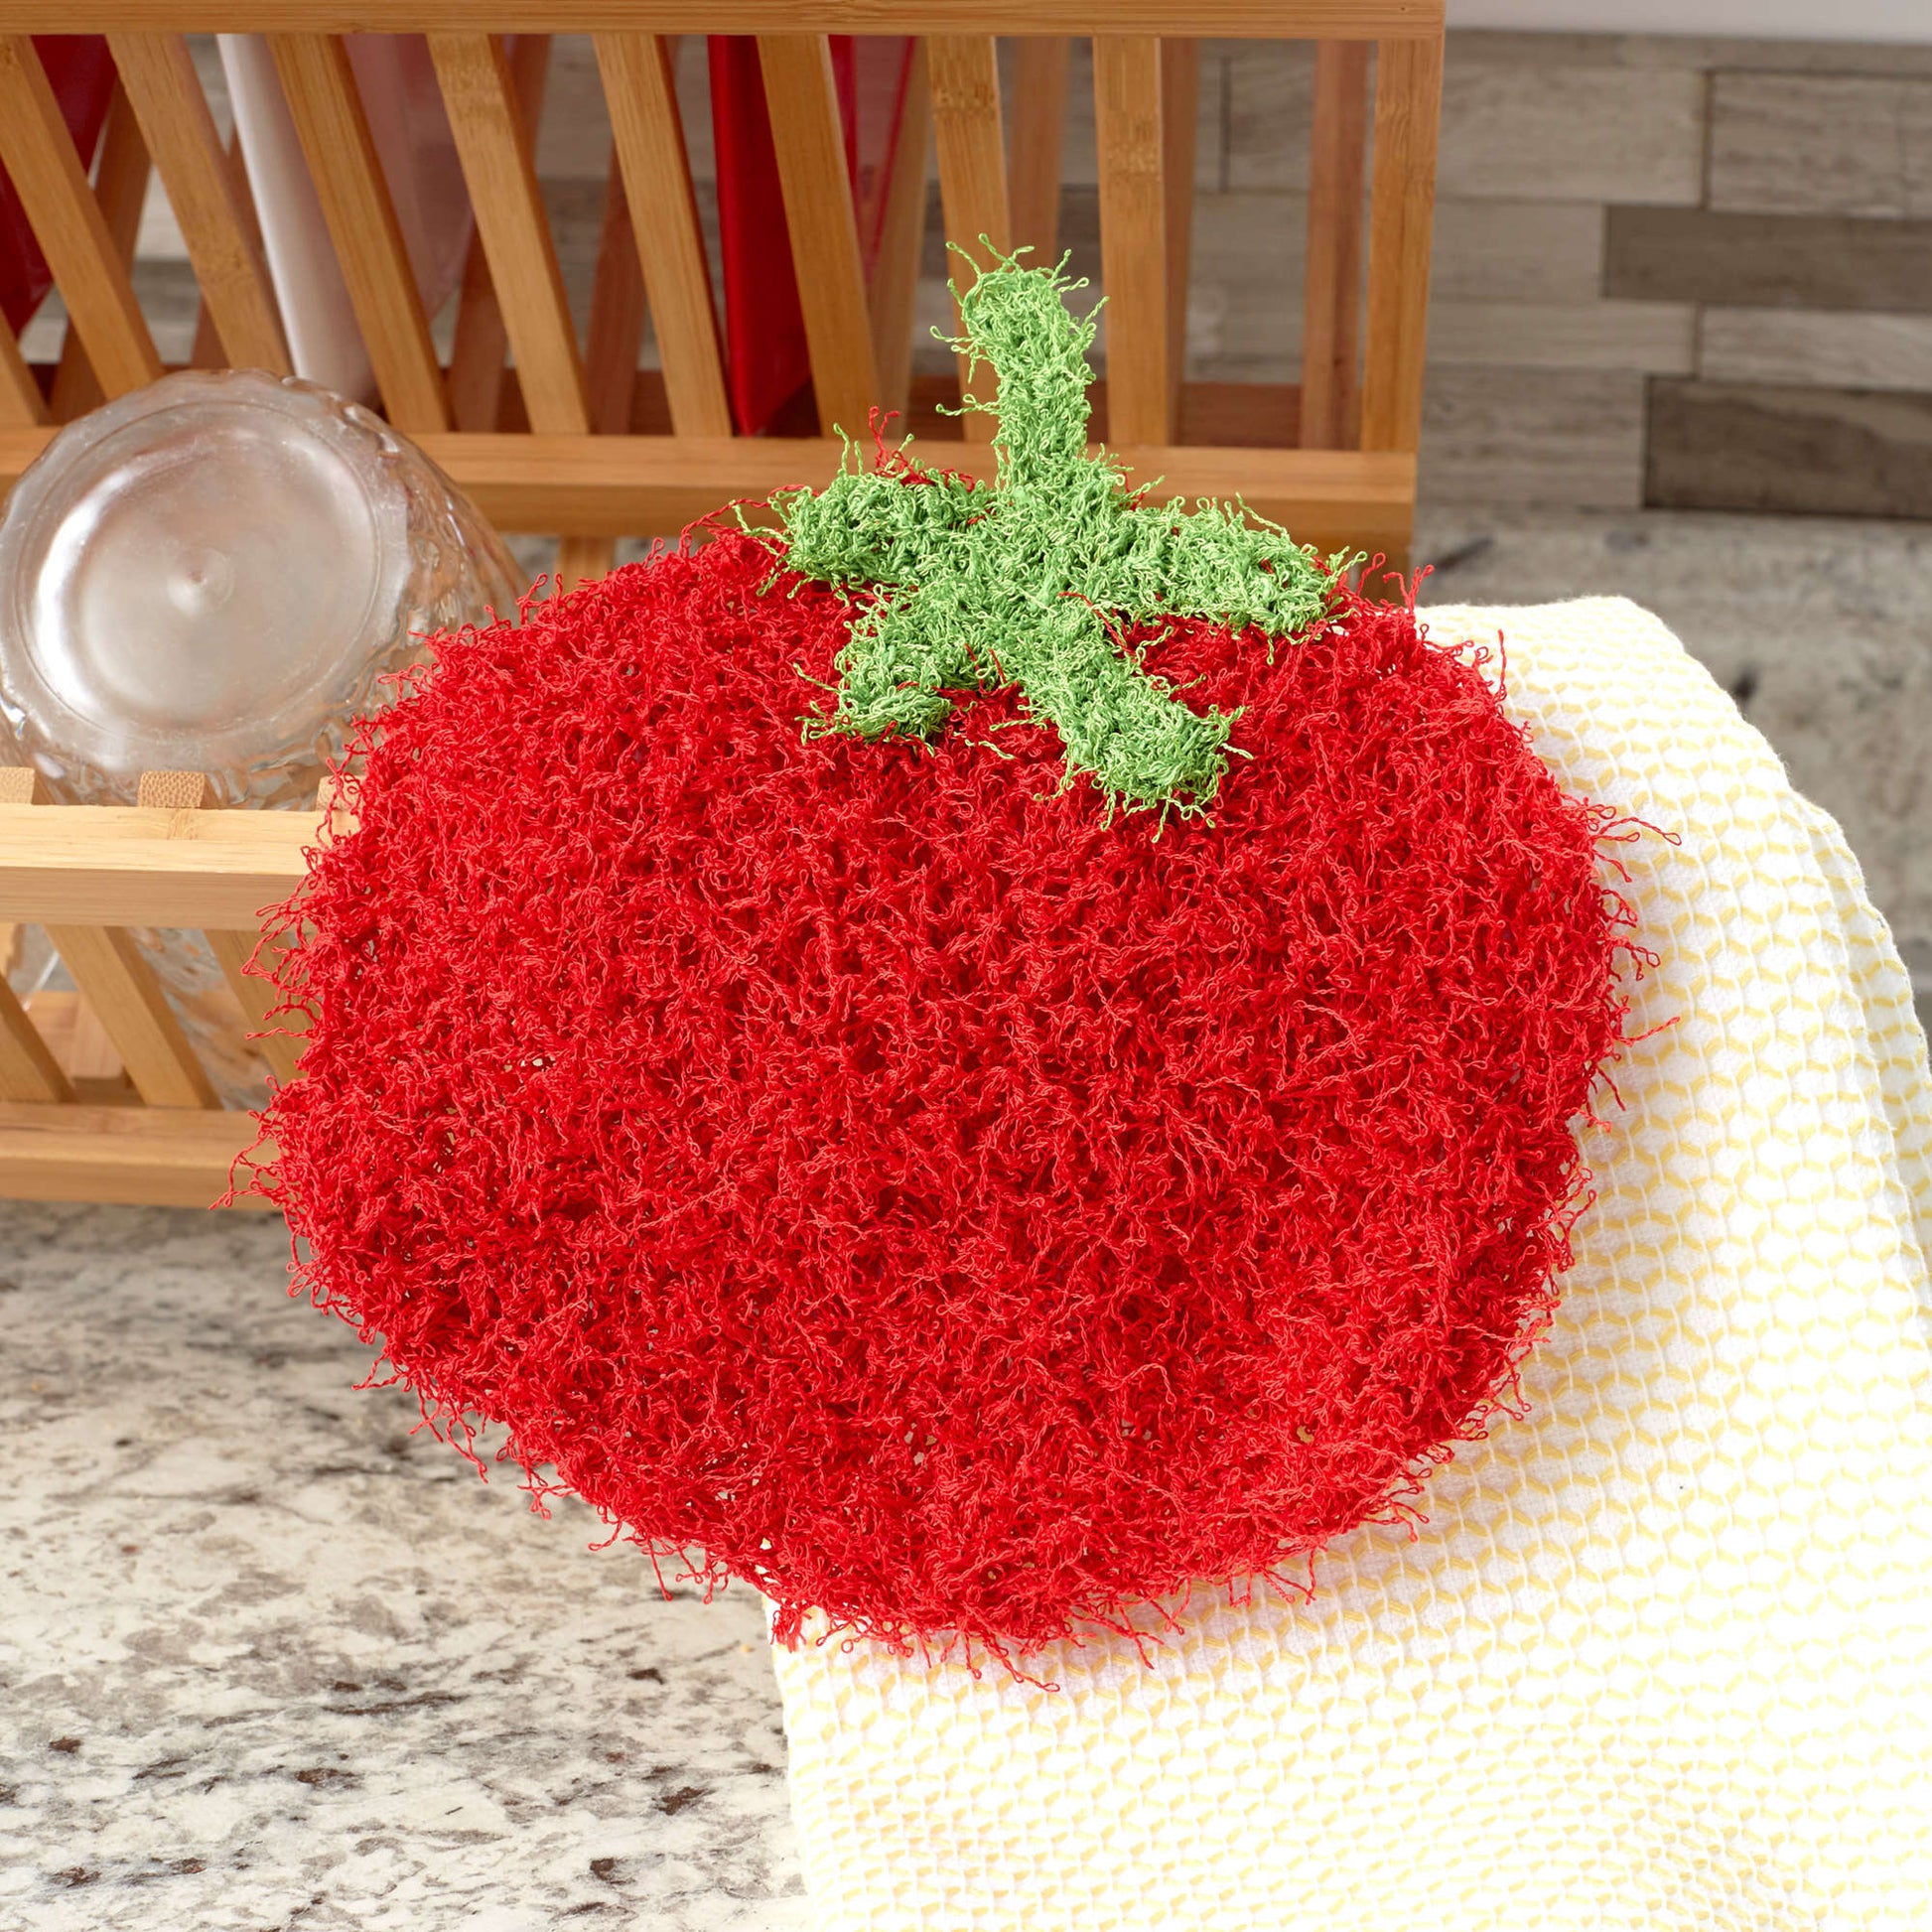 Free Red Heart Tomato Scrubby Knit Pattern